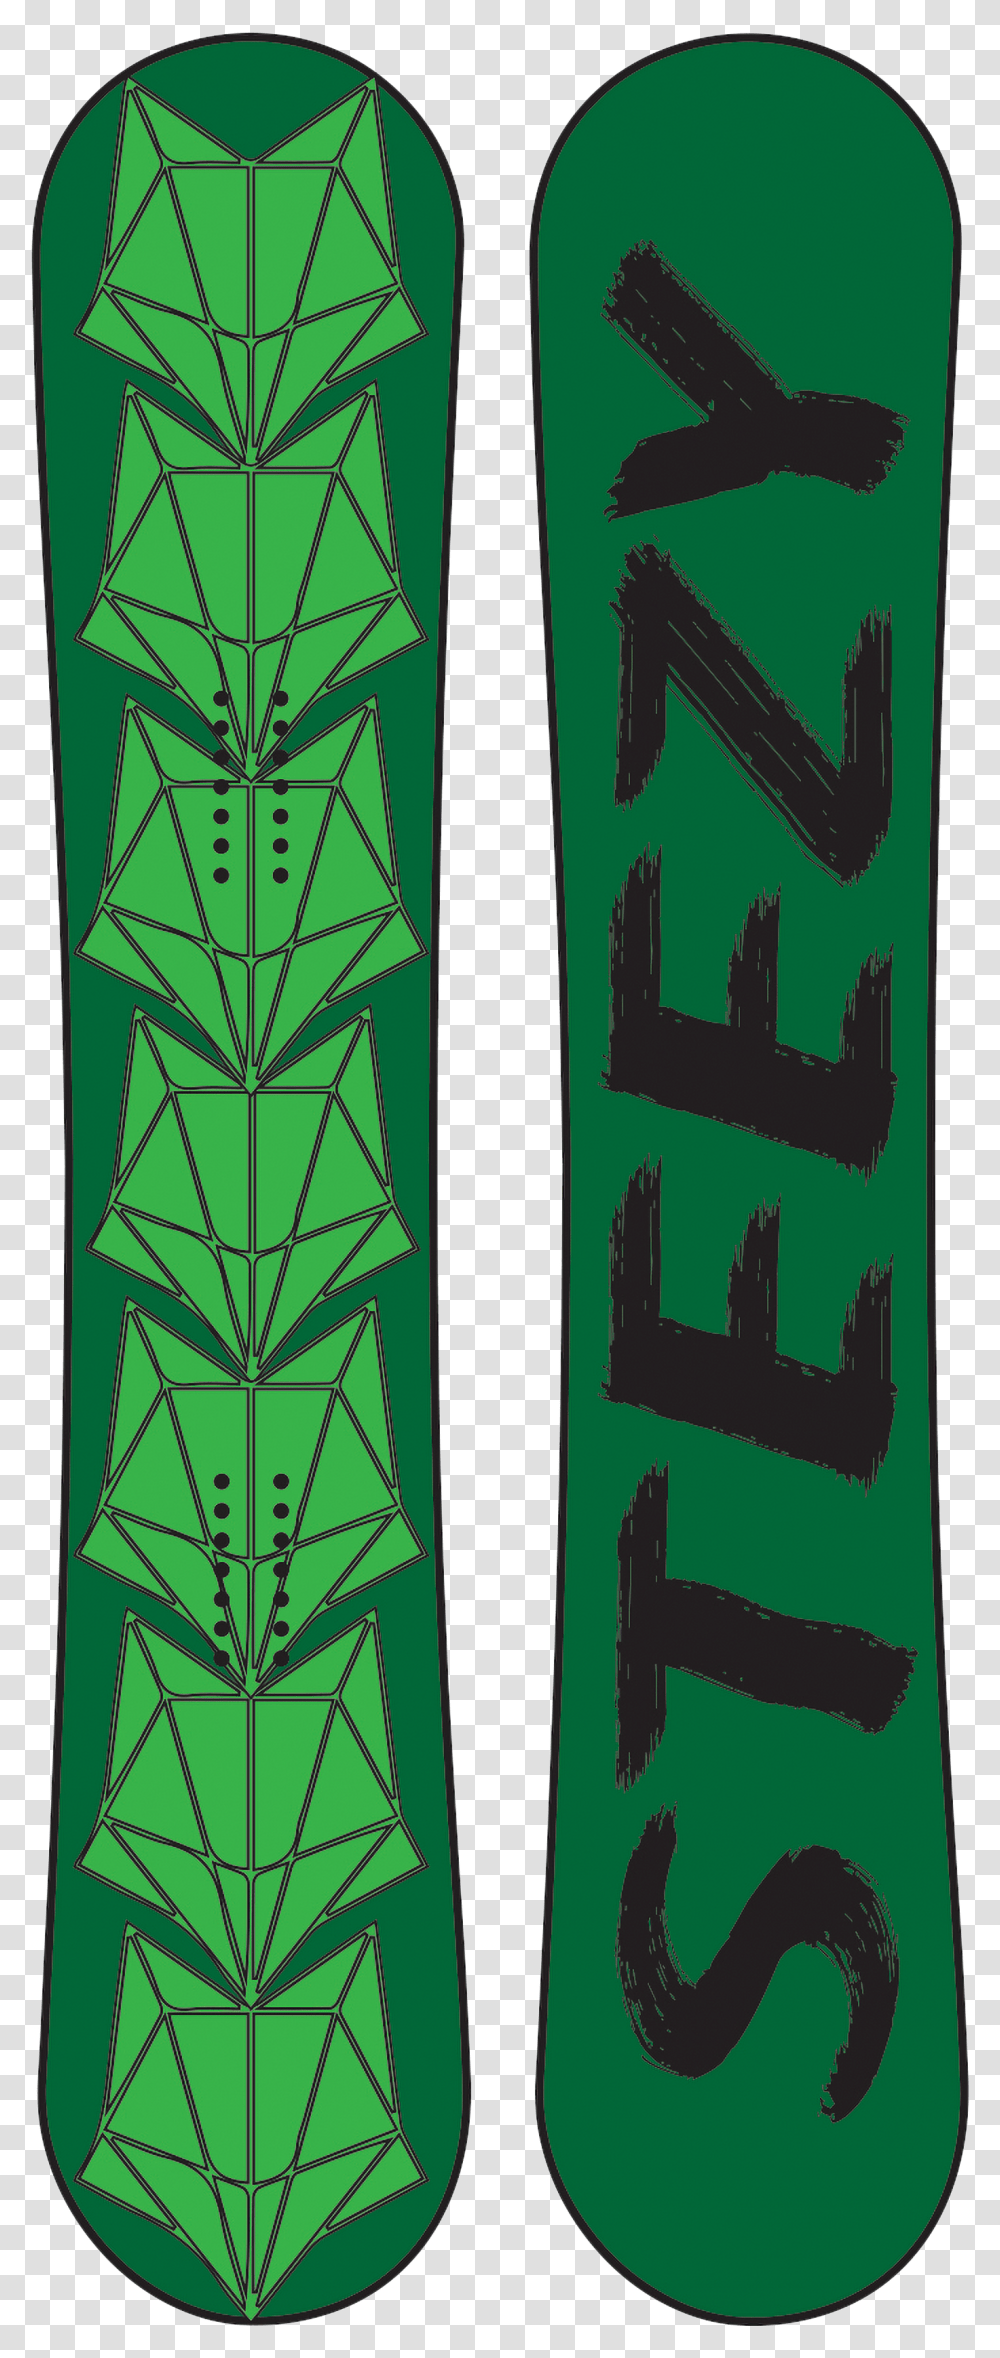 Steezy Green Lantern Snowboard Triangle Transparent Png